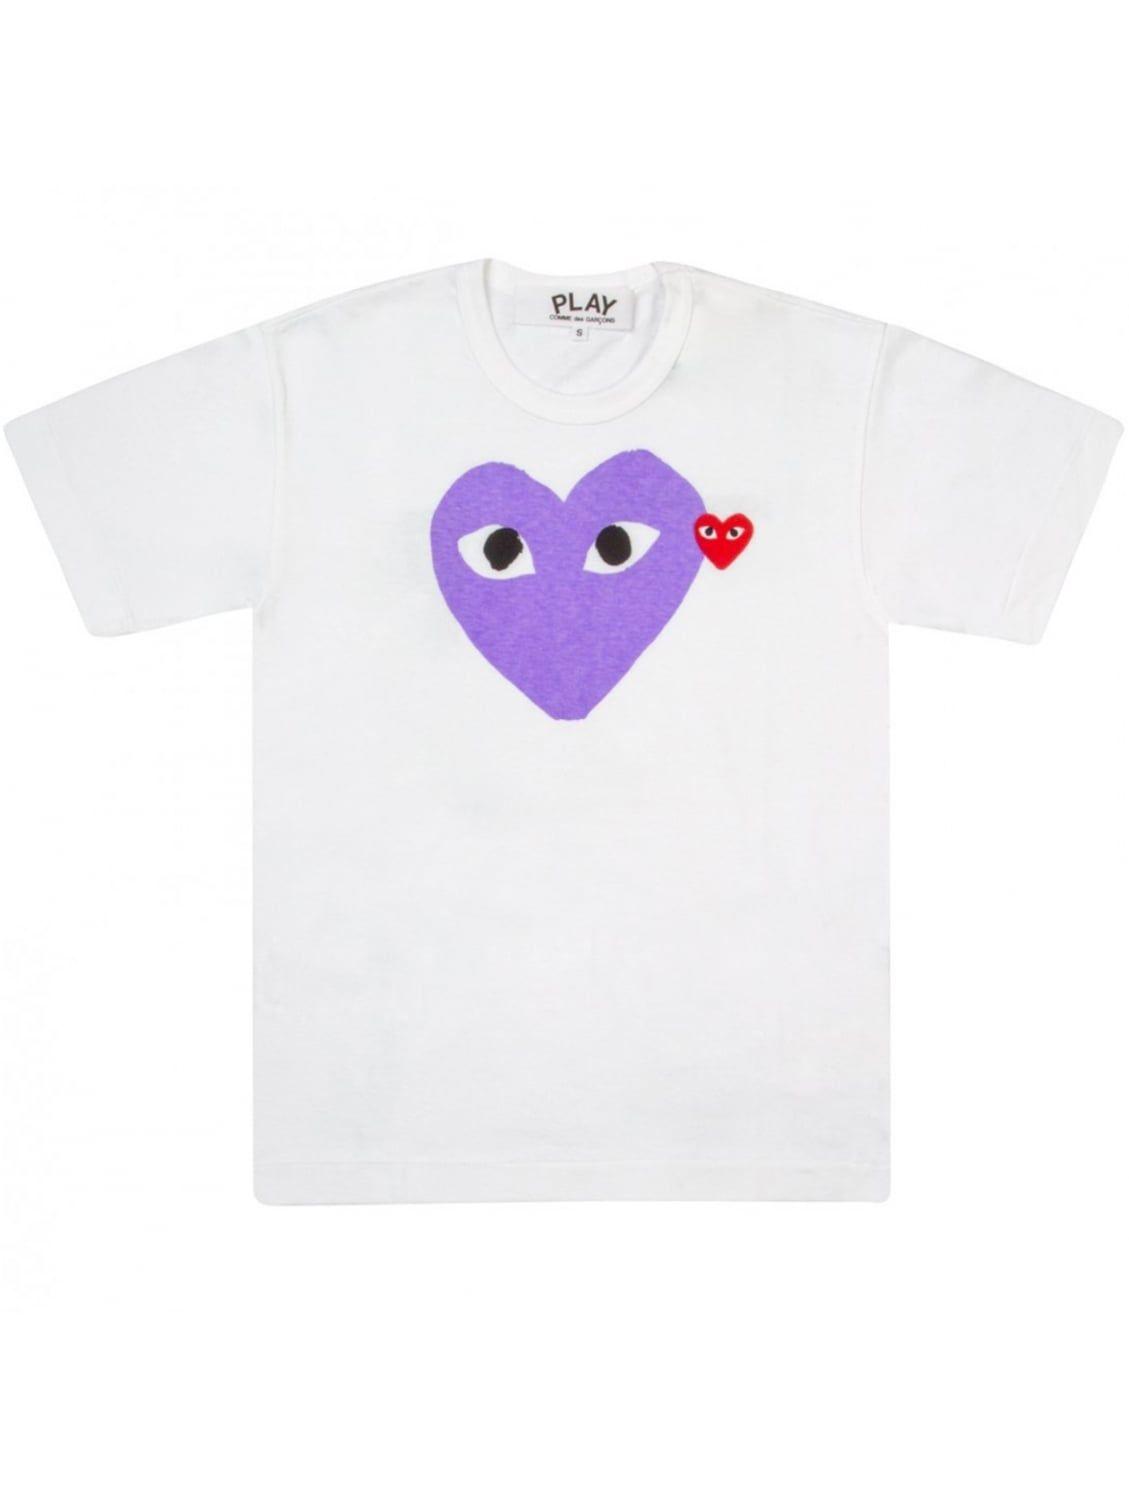 CDG Play Logo - Comme Des Garcons Clothing | PLAY Ladies Lilac Heart Logo T Shirt ...